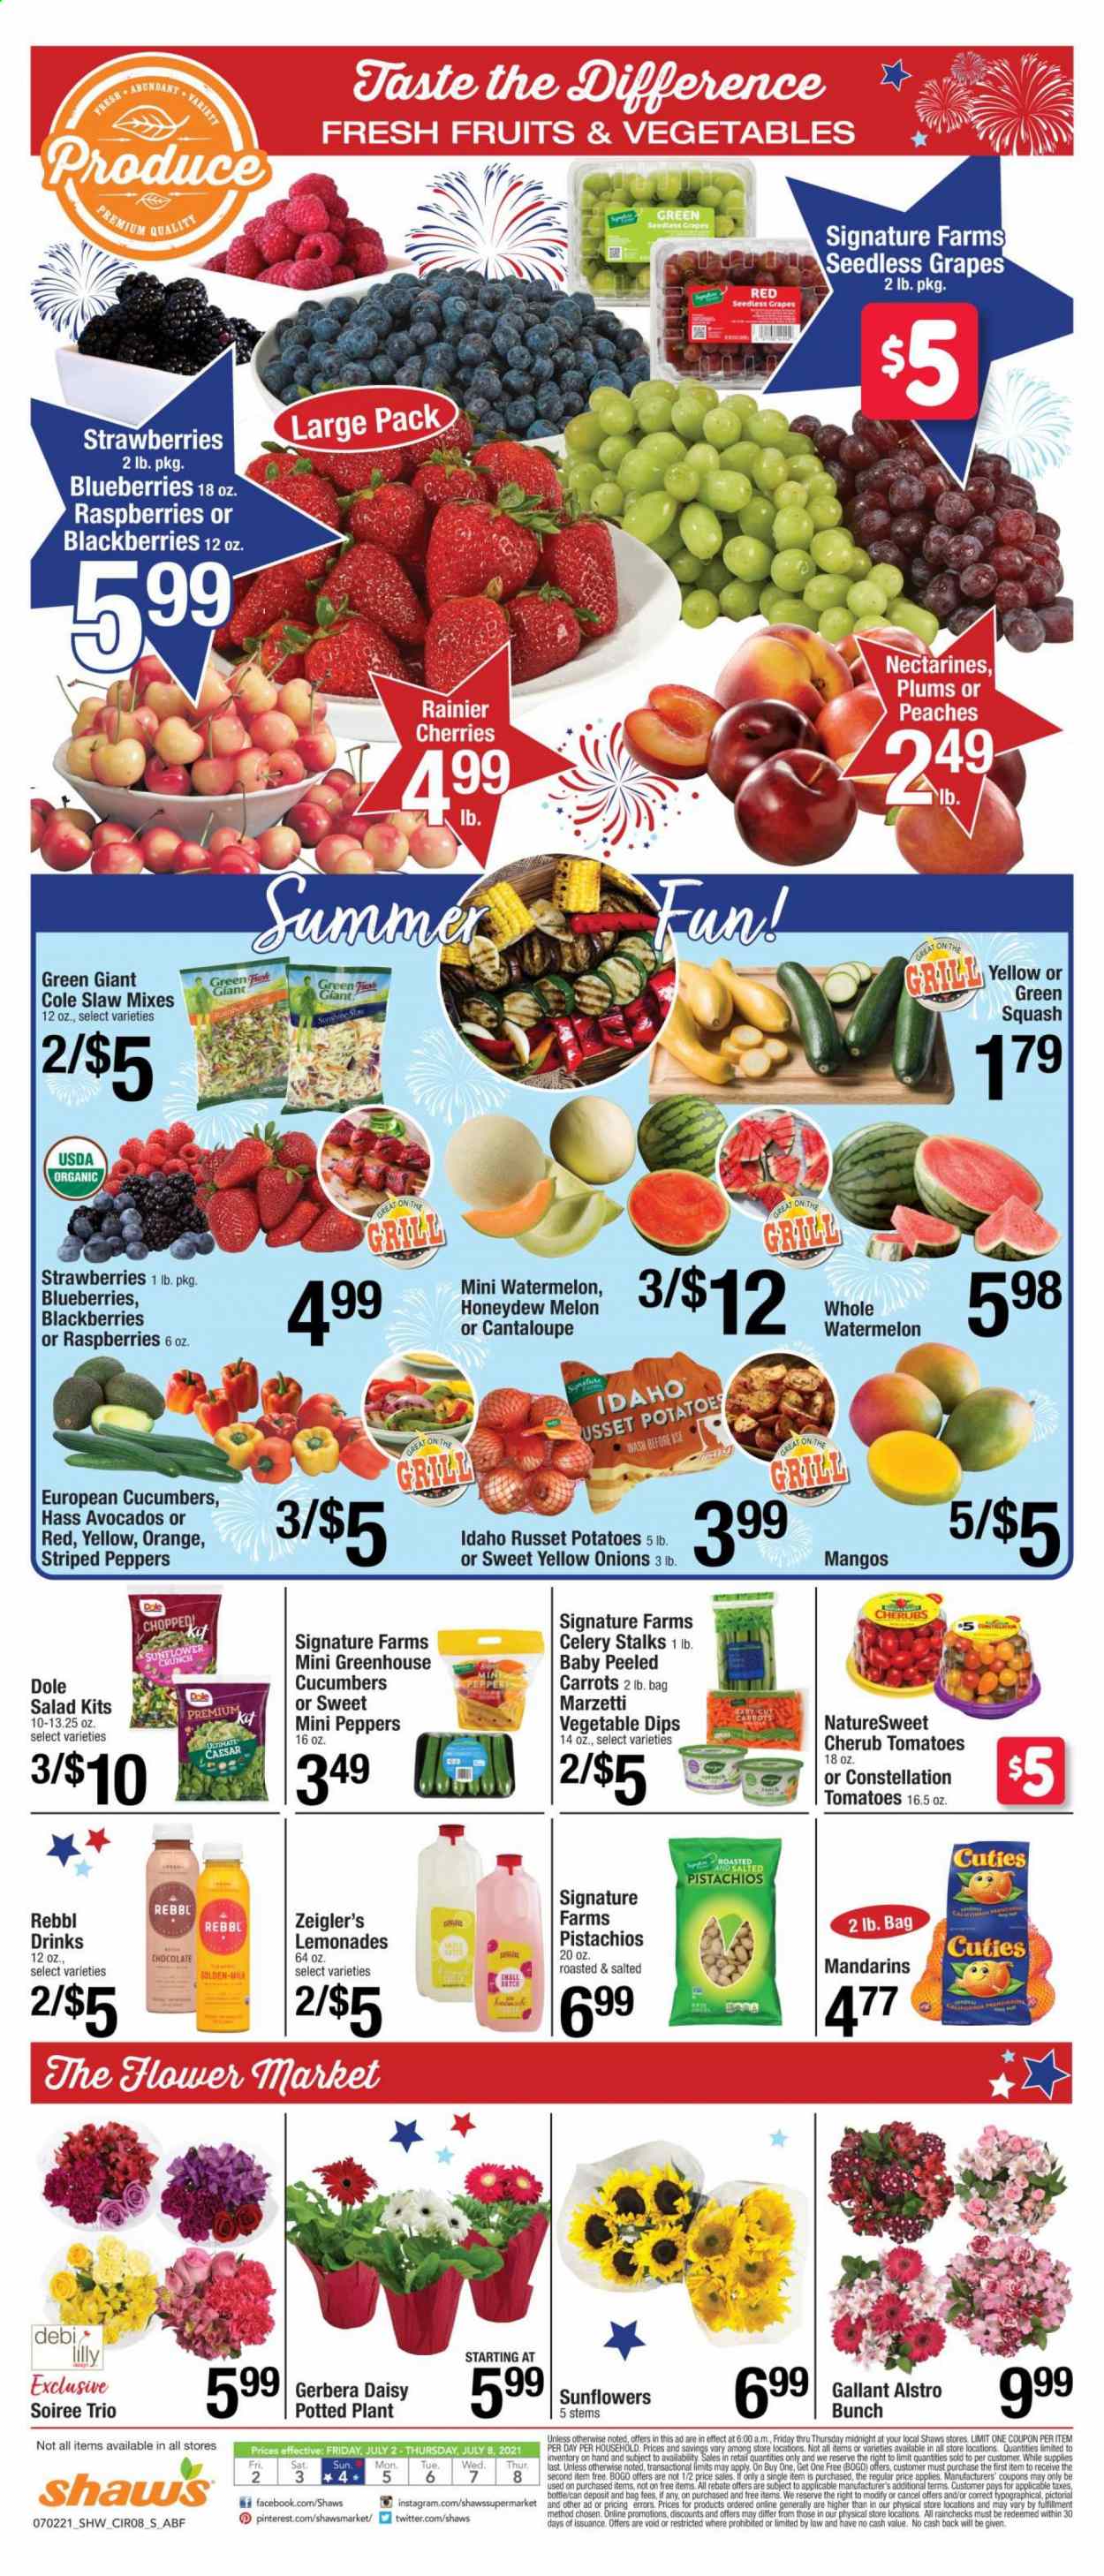 thumbnail - Shaw’s Flyer - 07/02/2021 - 07/08/2021 - Sales products - seedless grapes, plums, carrots, celery, russet potatoes, tomatoes, zucchini, potatoes, onion, salad, Dole, peppers, sleeved celery, avocado, blackberries, blueberries, grapes, mandarines, mango, raspberries, strawberries, watermelon, honeydew, cherries, milk, chocolate, pistachios, sunflower, gerbera, nectarines, melons, peaches. Page 7.